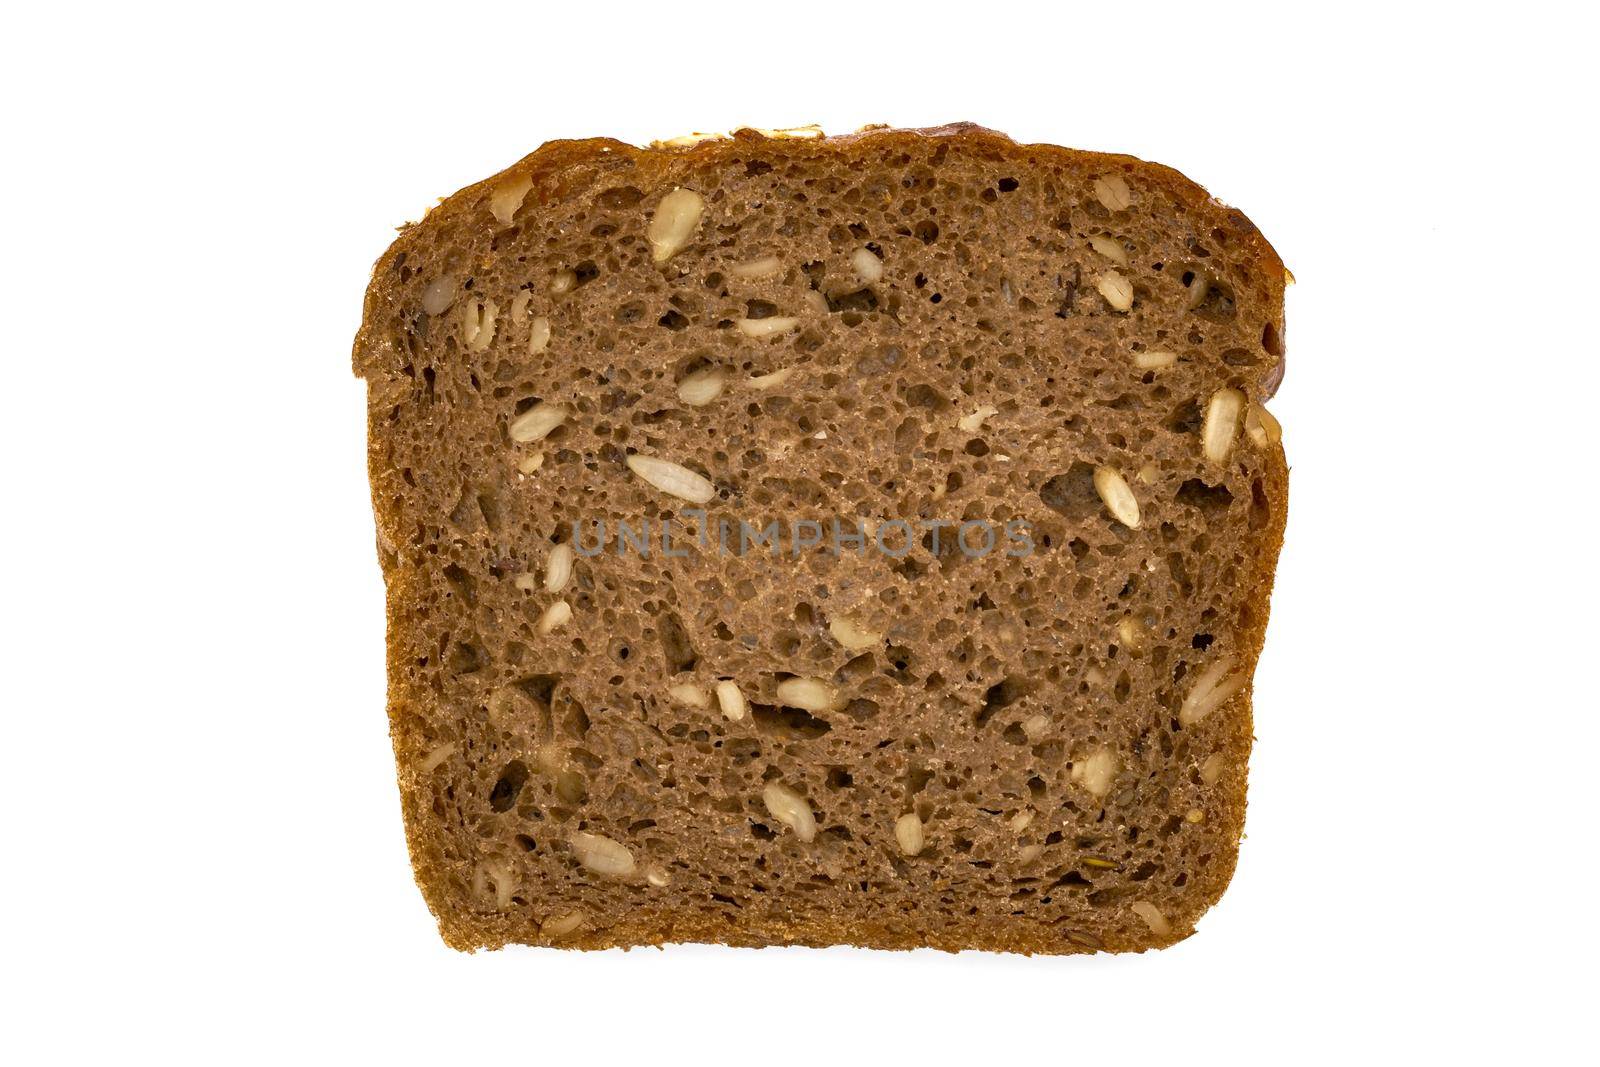 Slice of wholemeal dark bread isolated on a white background in close-up (high details)